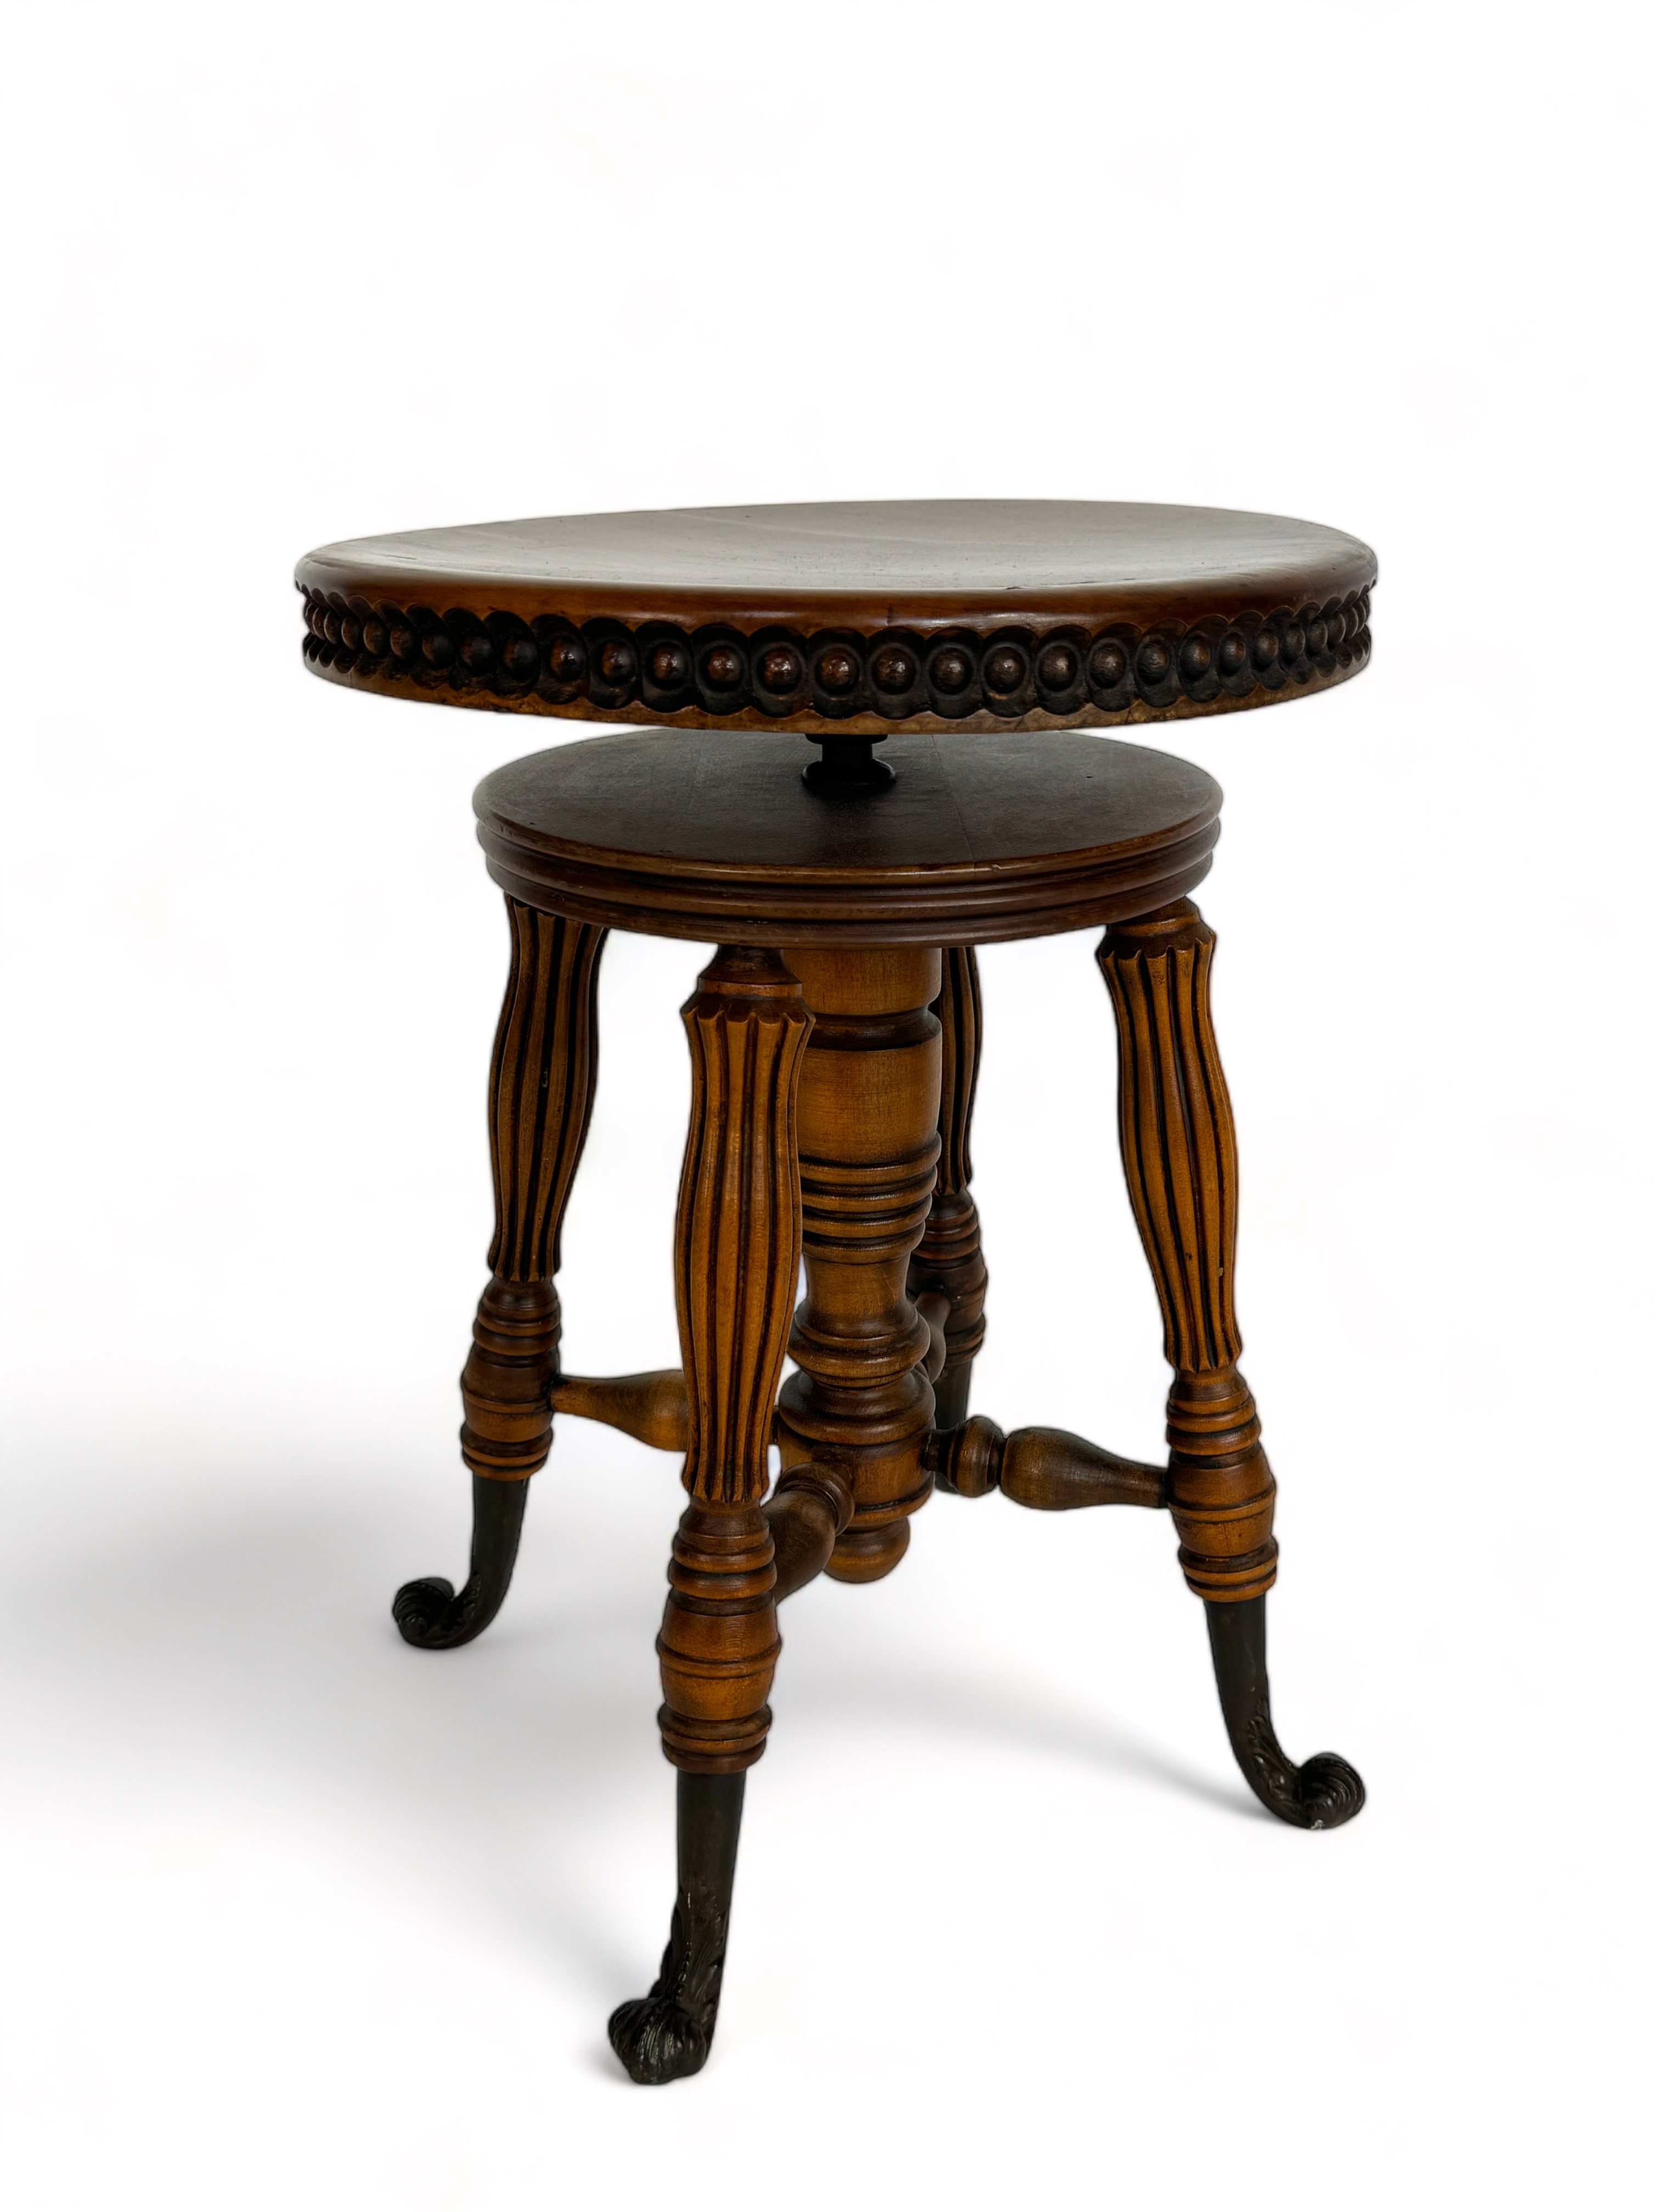 A late 19th century American beechwood circular revolving piano stool by Tonk of New York & Chicago